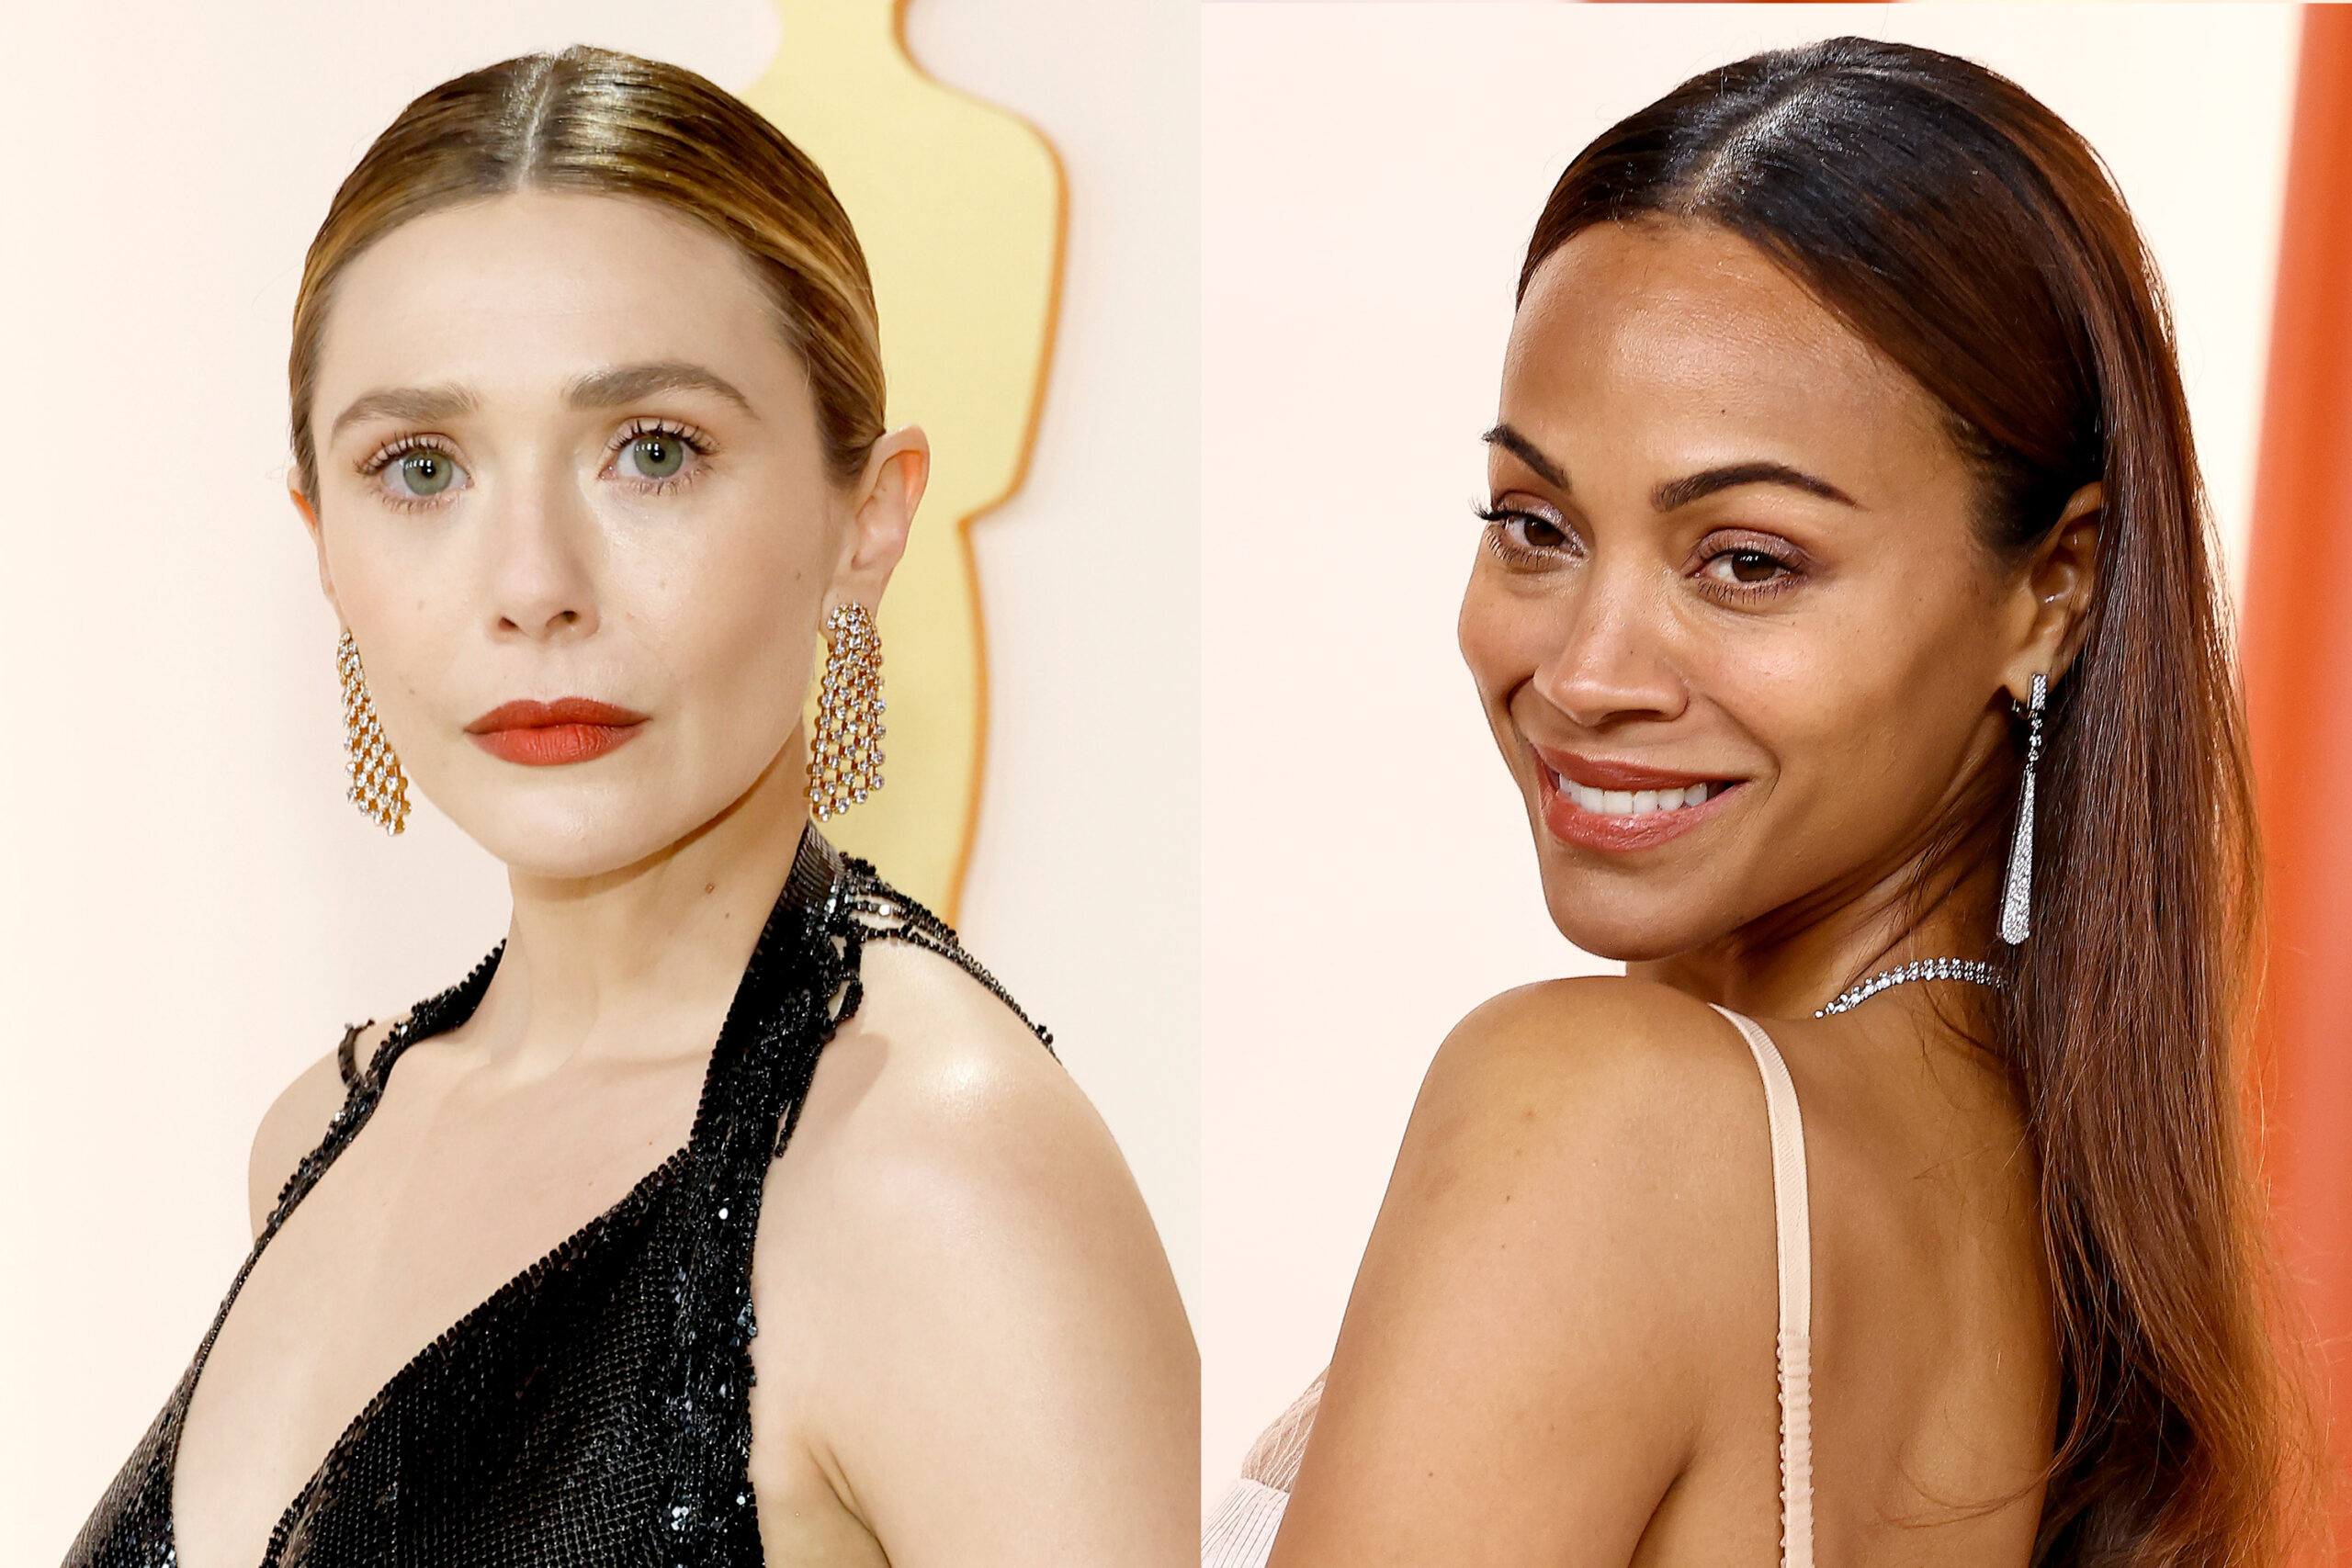 Slicked-Back Hair Stole The Show At The Oscars